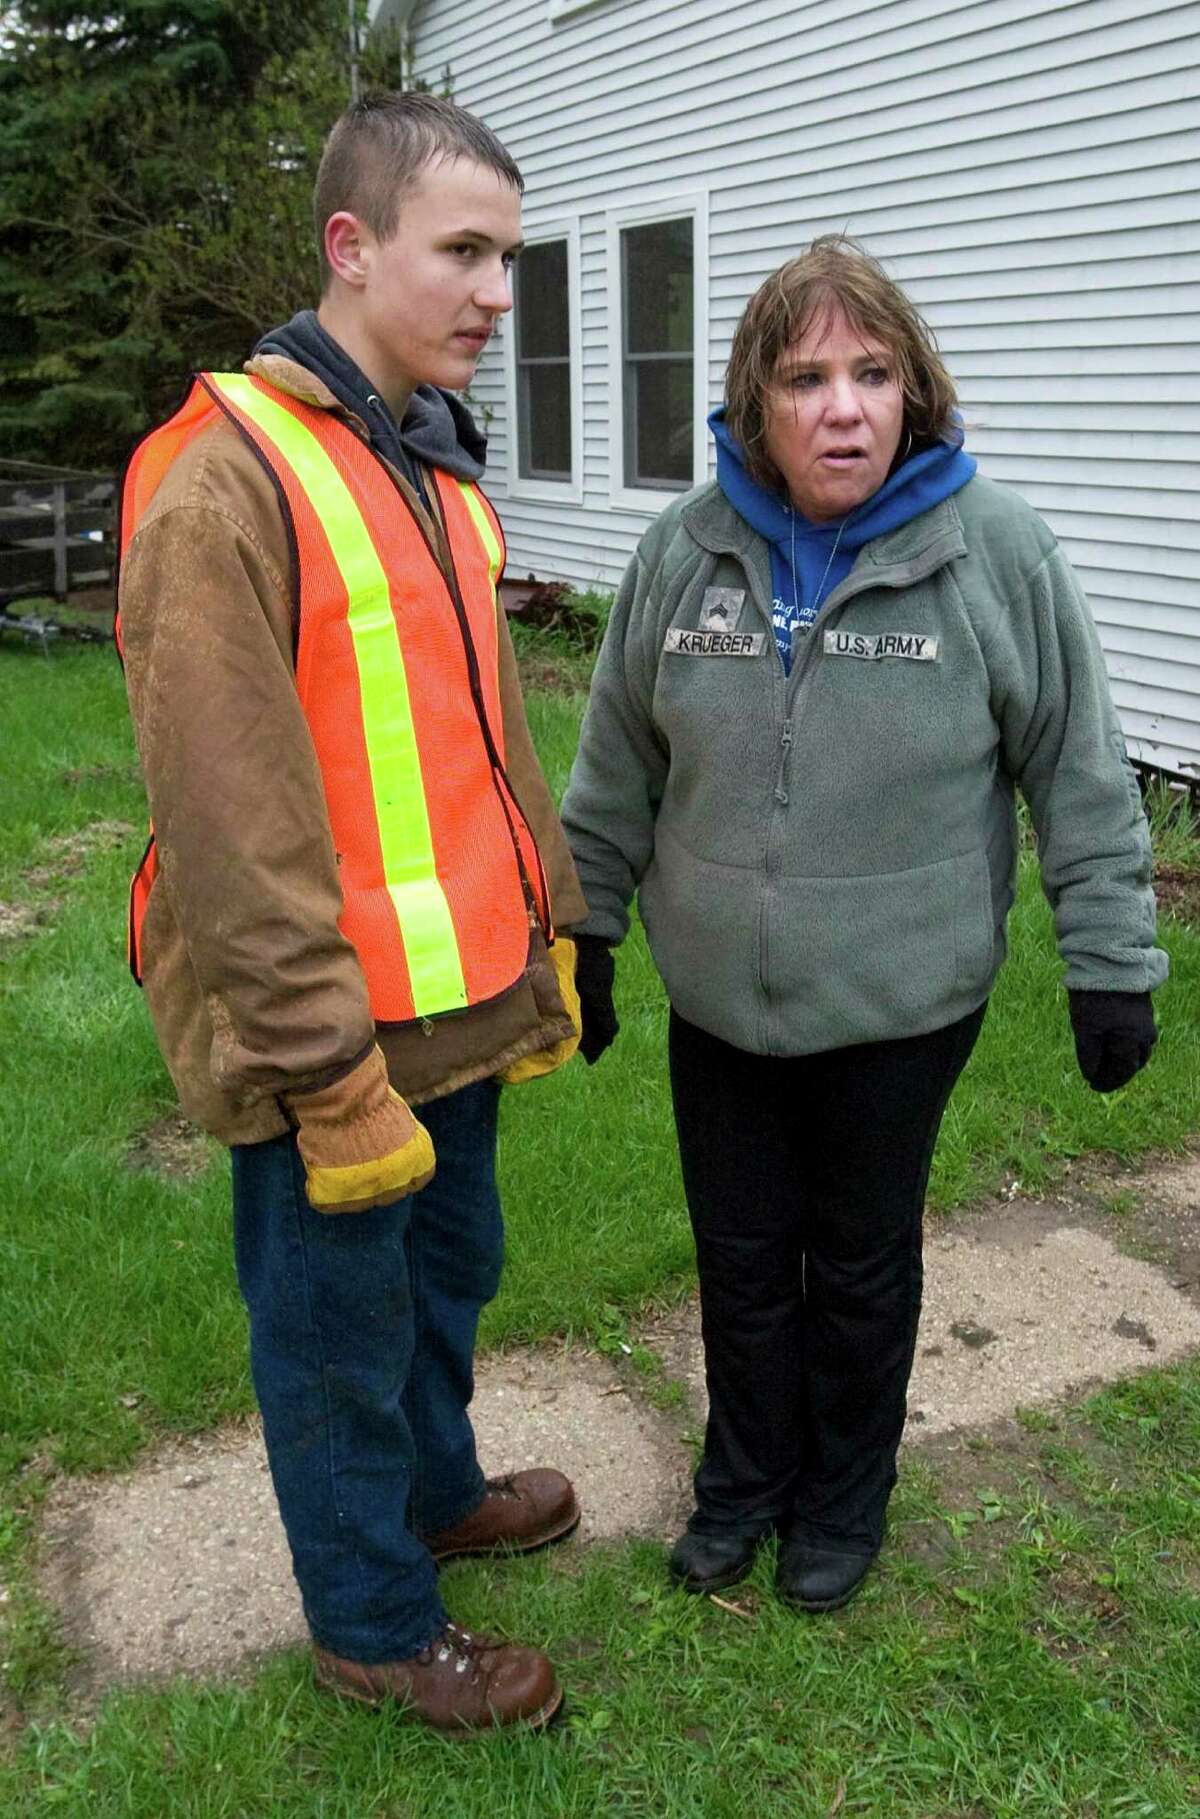 Jeri Krueger, seen here outside her home in Kiel, Wis., with Naval Sea Cadet Tyler Tuttle, lost her daughter, Staff Sgt. Amy Krueger, in the Nov. 5, 2009, attack at Fort Hood. The grieving mother said she shed tears of relief after the man responsible was sentenced to death.